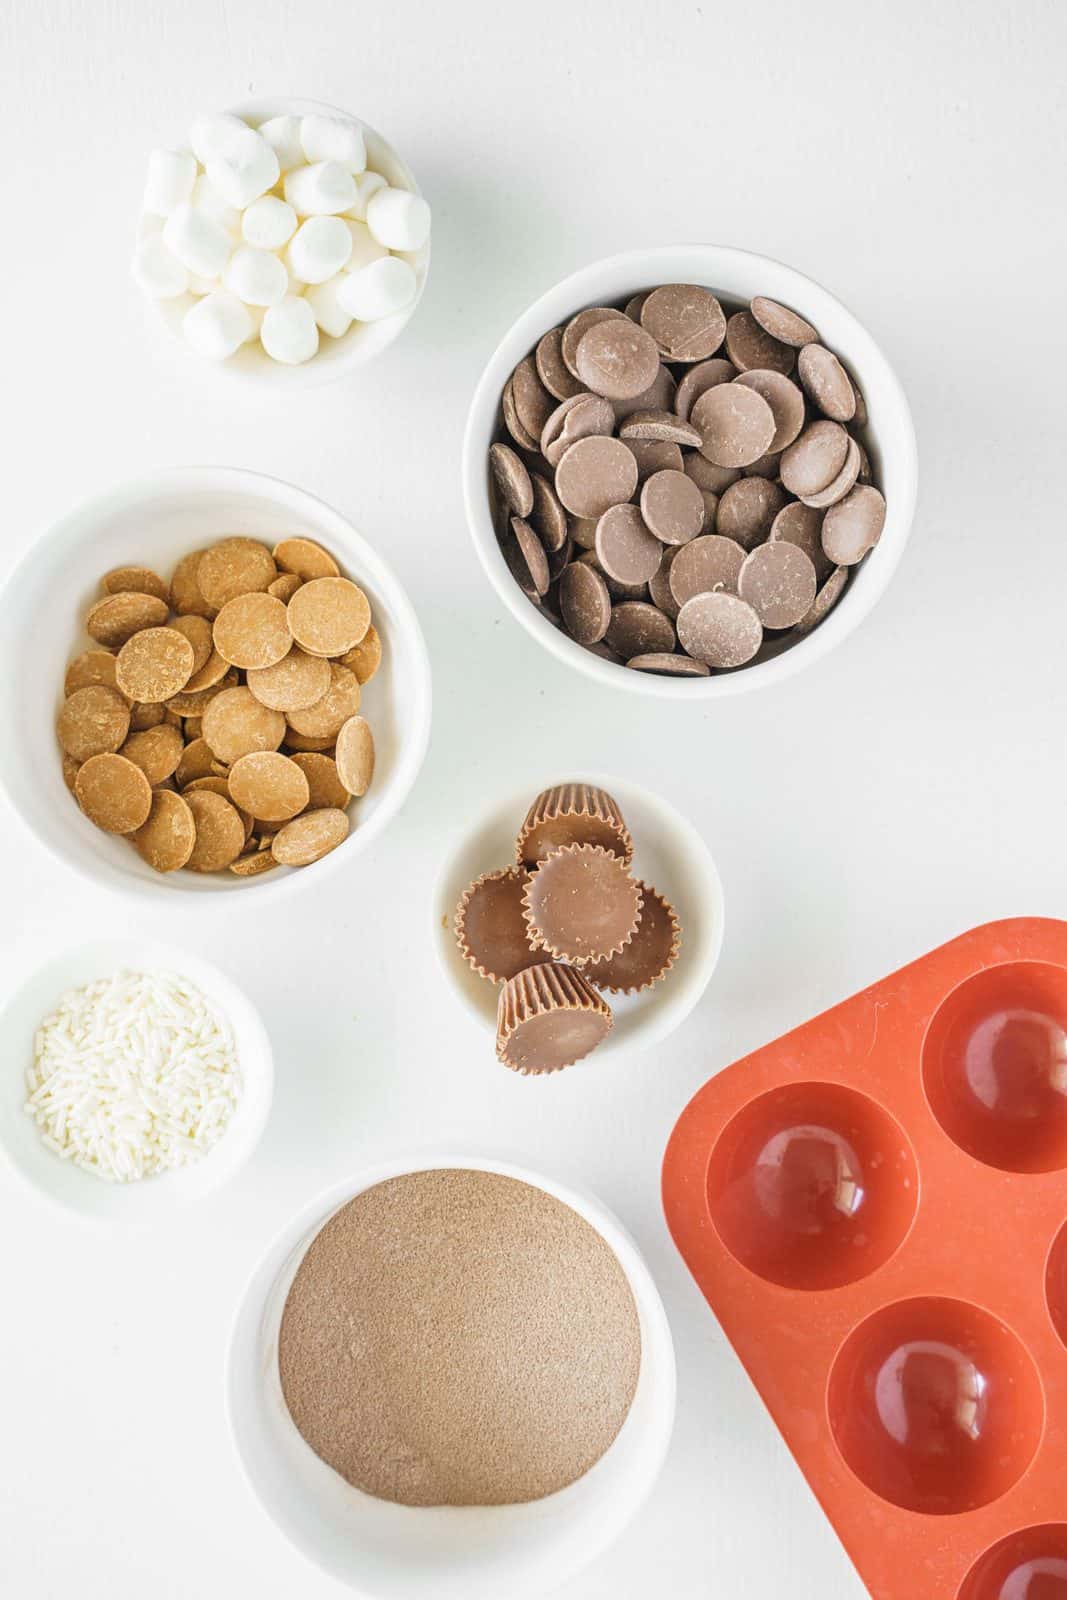 Ingredients needed: chocolate candy melts, hot cocoa, mini marshmallows, mini peanut butter cups, peanut butter candy melts and sprinkles.